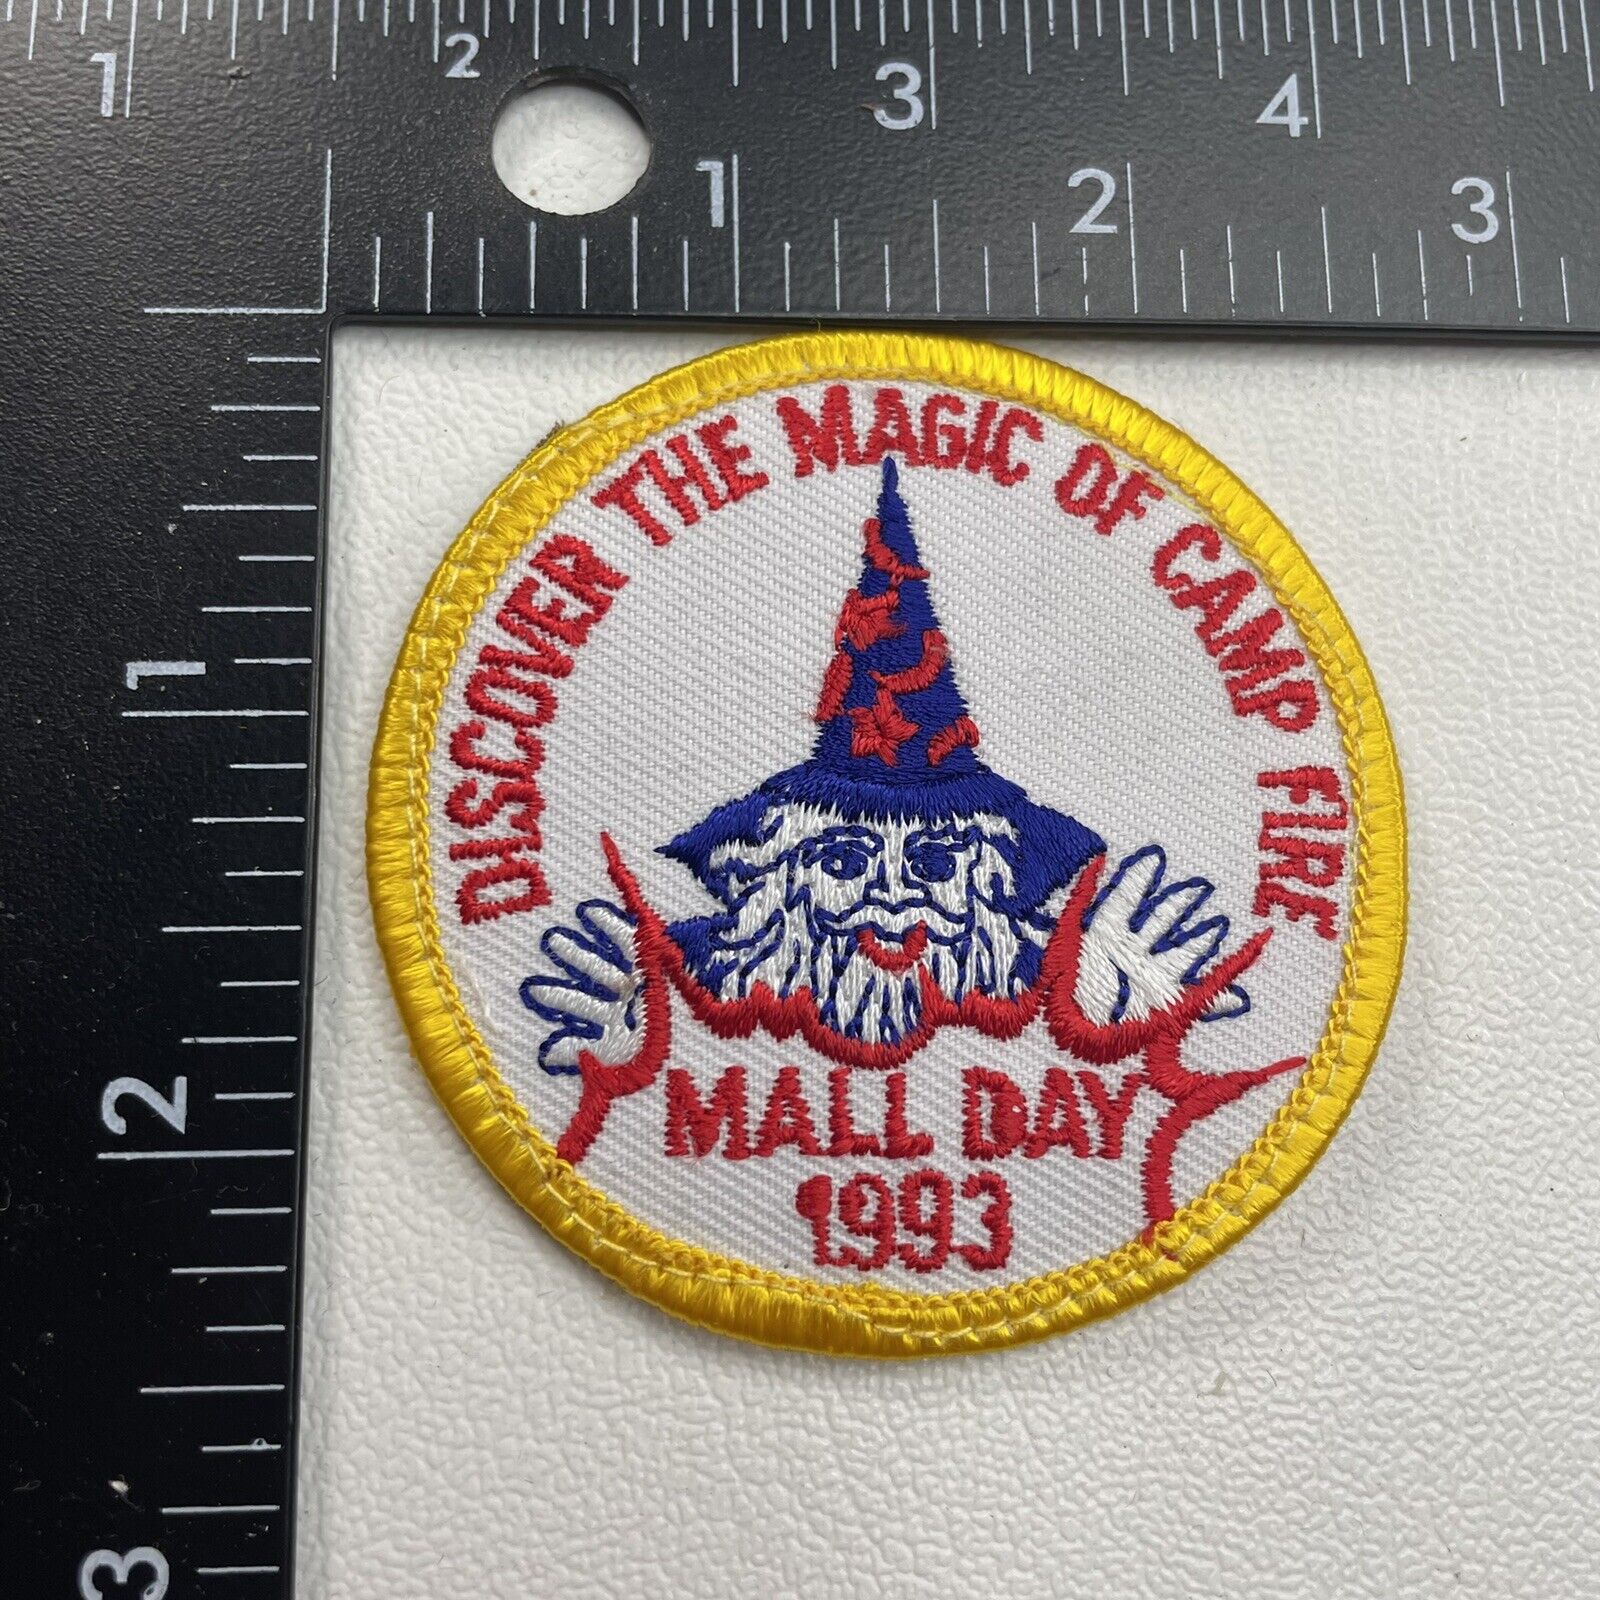 Vtg MALL DAY 1993 Discover The Magic Of Camp Fire Girls Patch 22MC